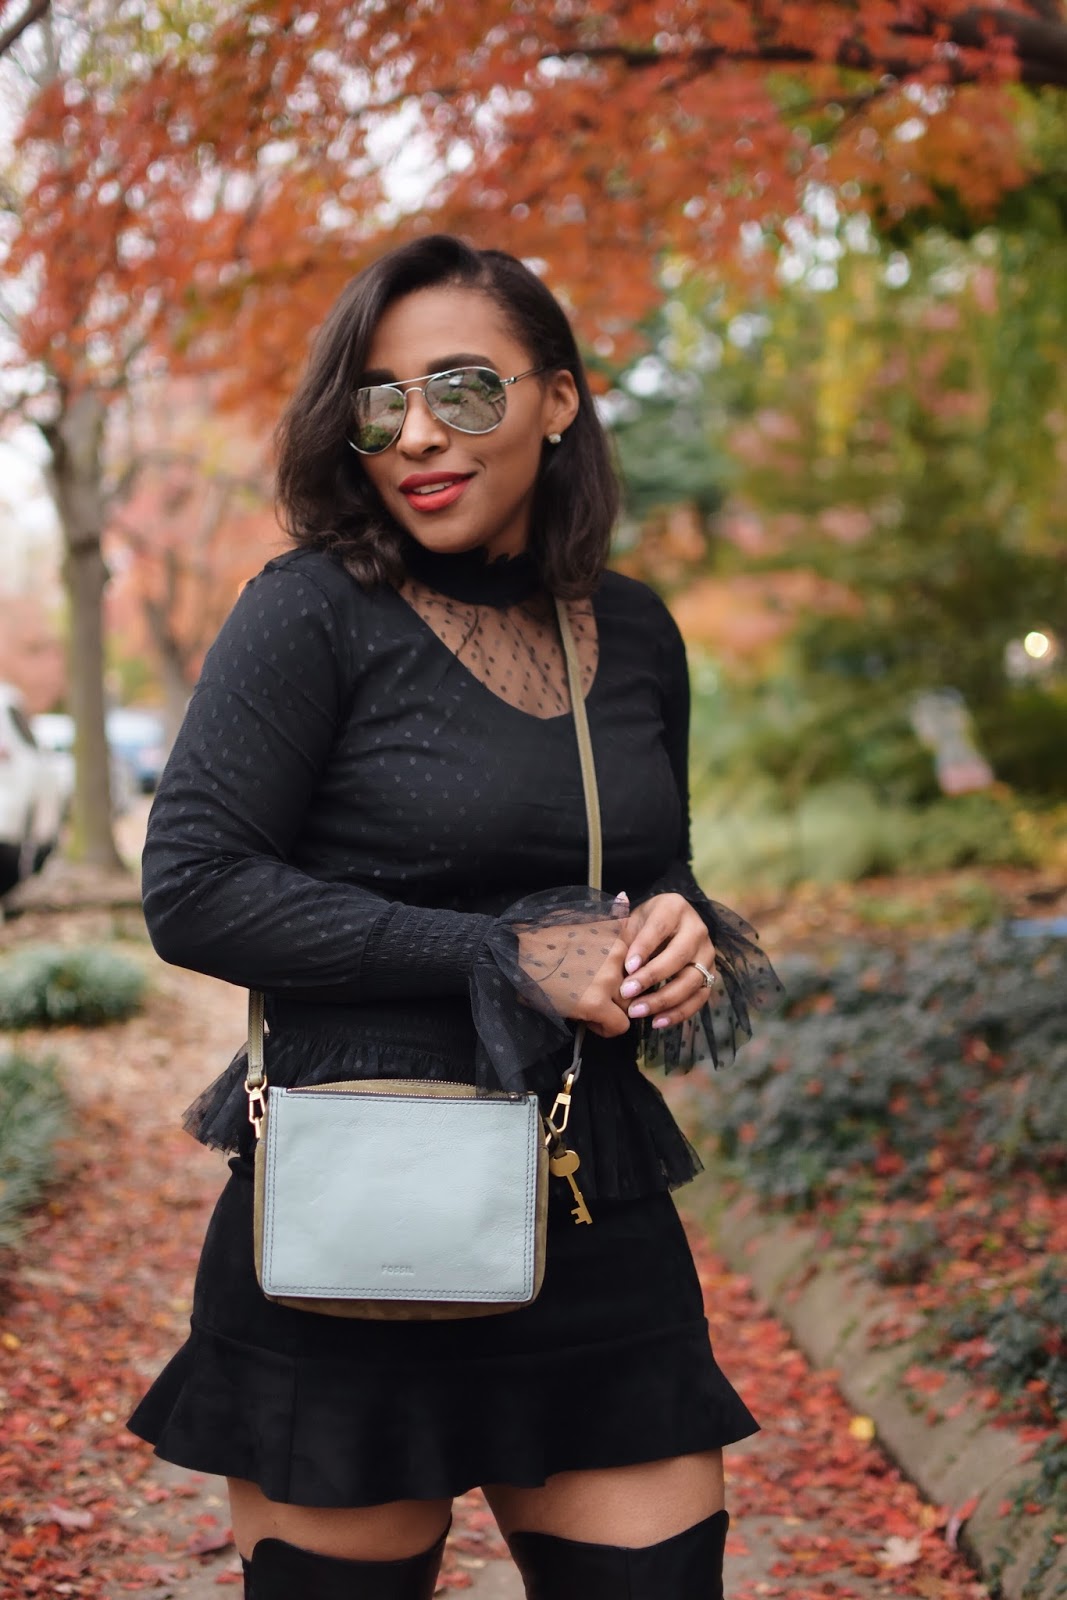 All black look, over the knee boots, otk boots, thankful, thanksgiving, rainbow shops, forever21, dominican blogger, latina blogger, fossil purses, fall foilage